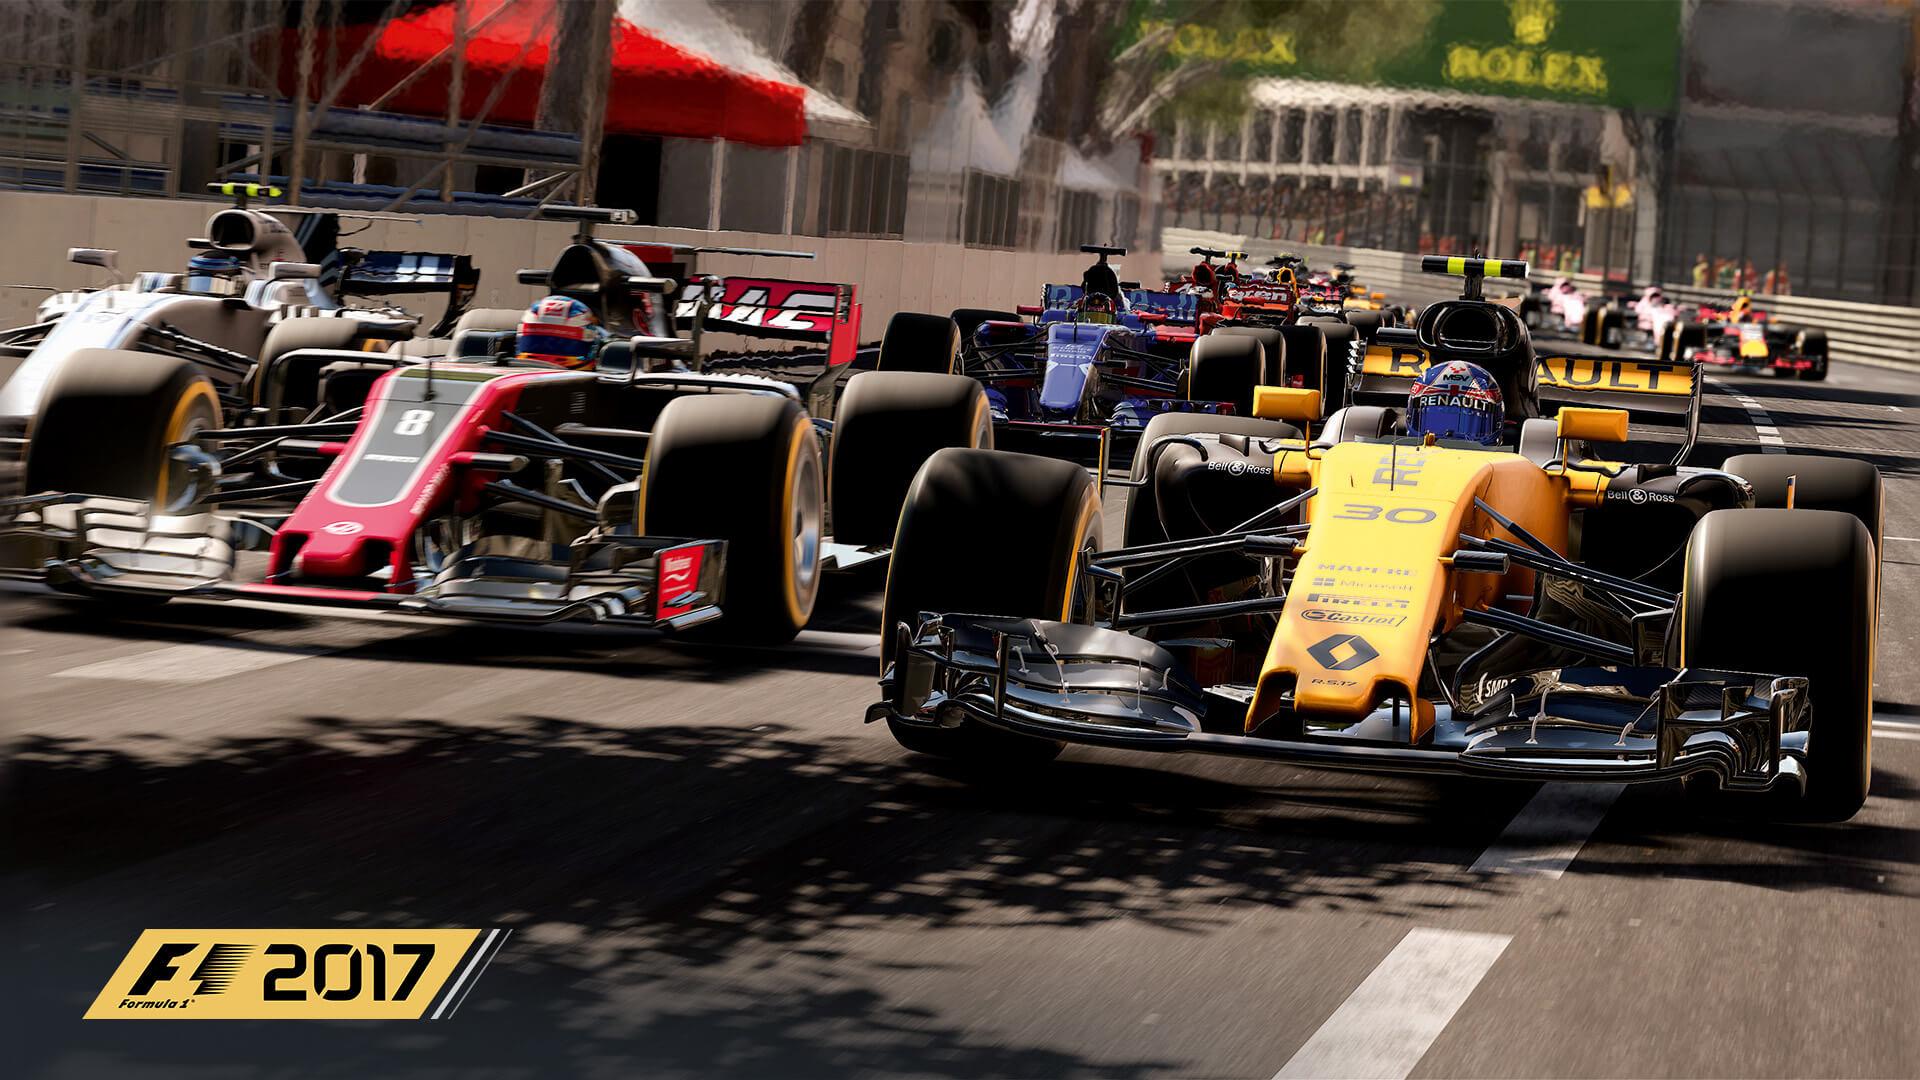 Download F1 2017 HD Wallpaper 1920x1080 games review, play